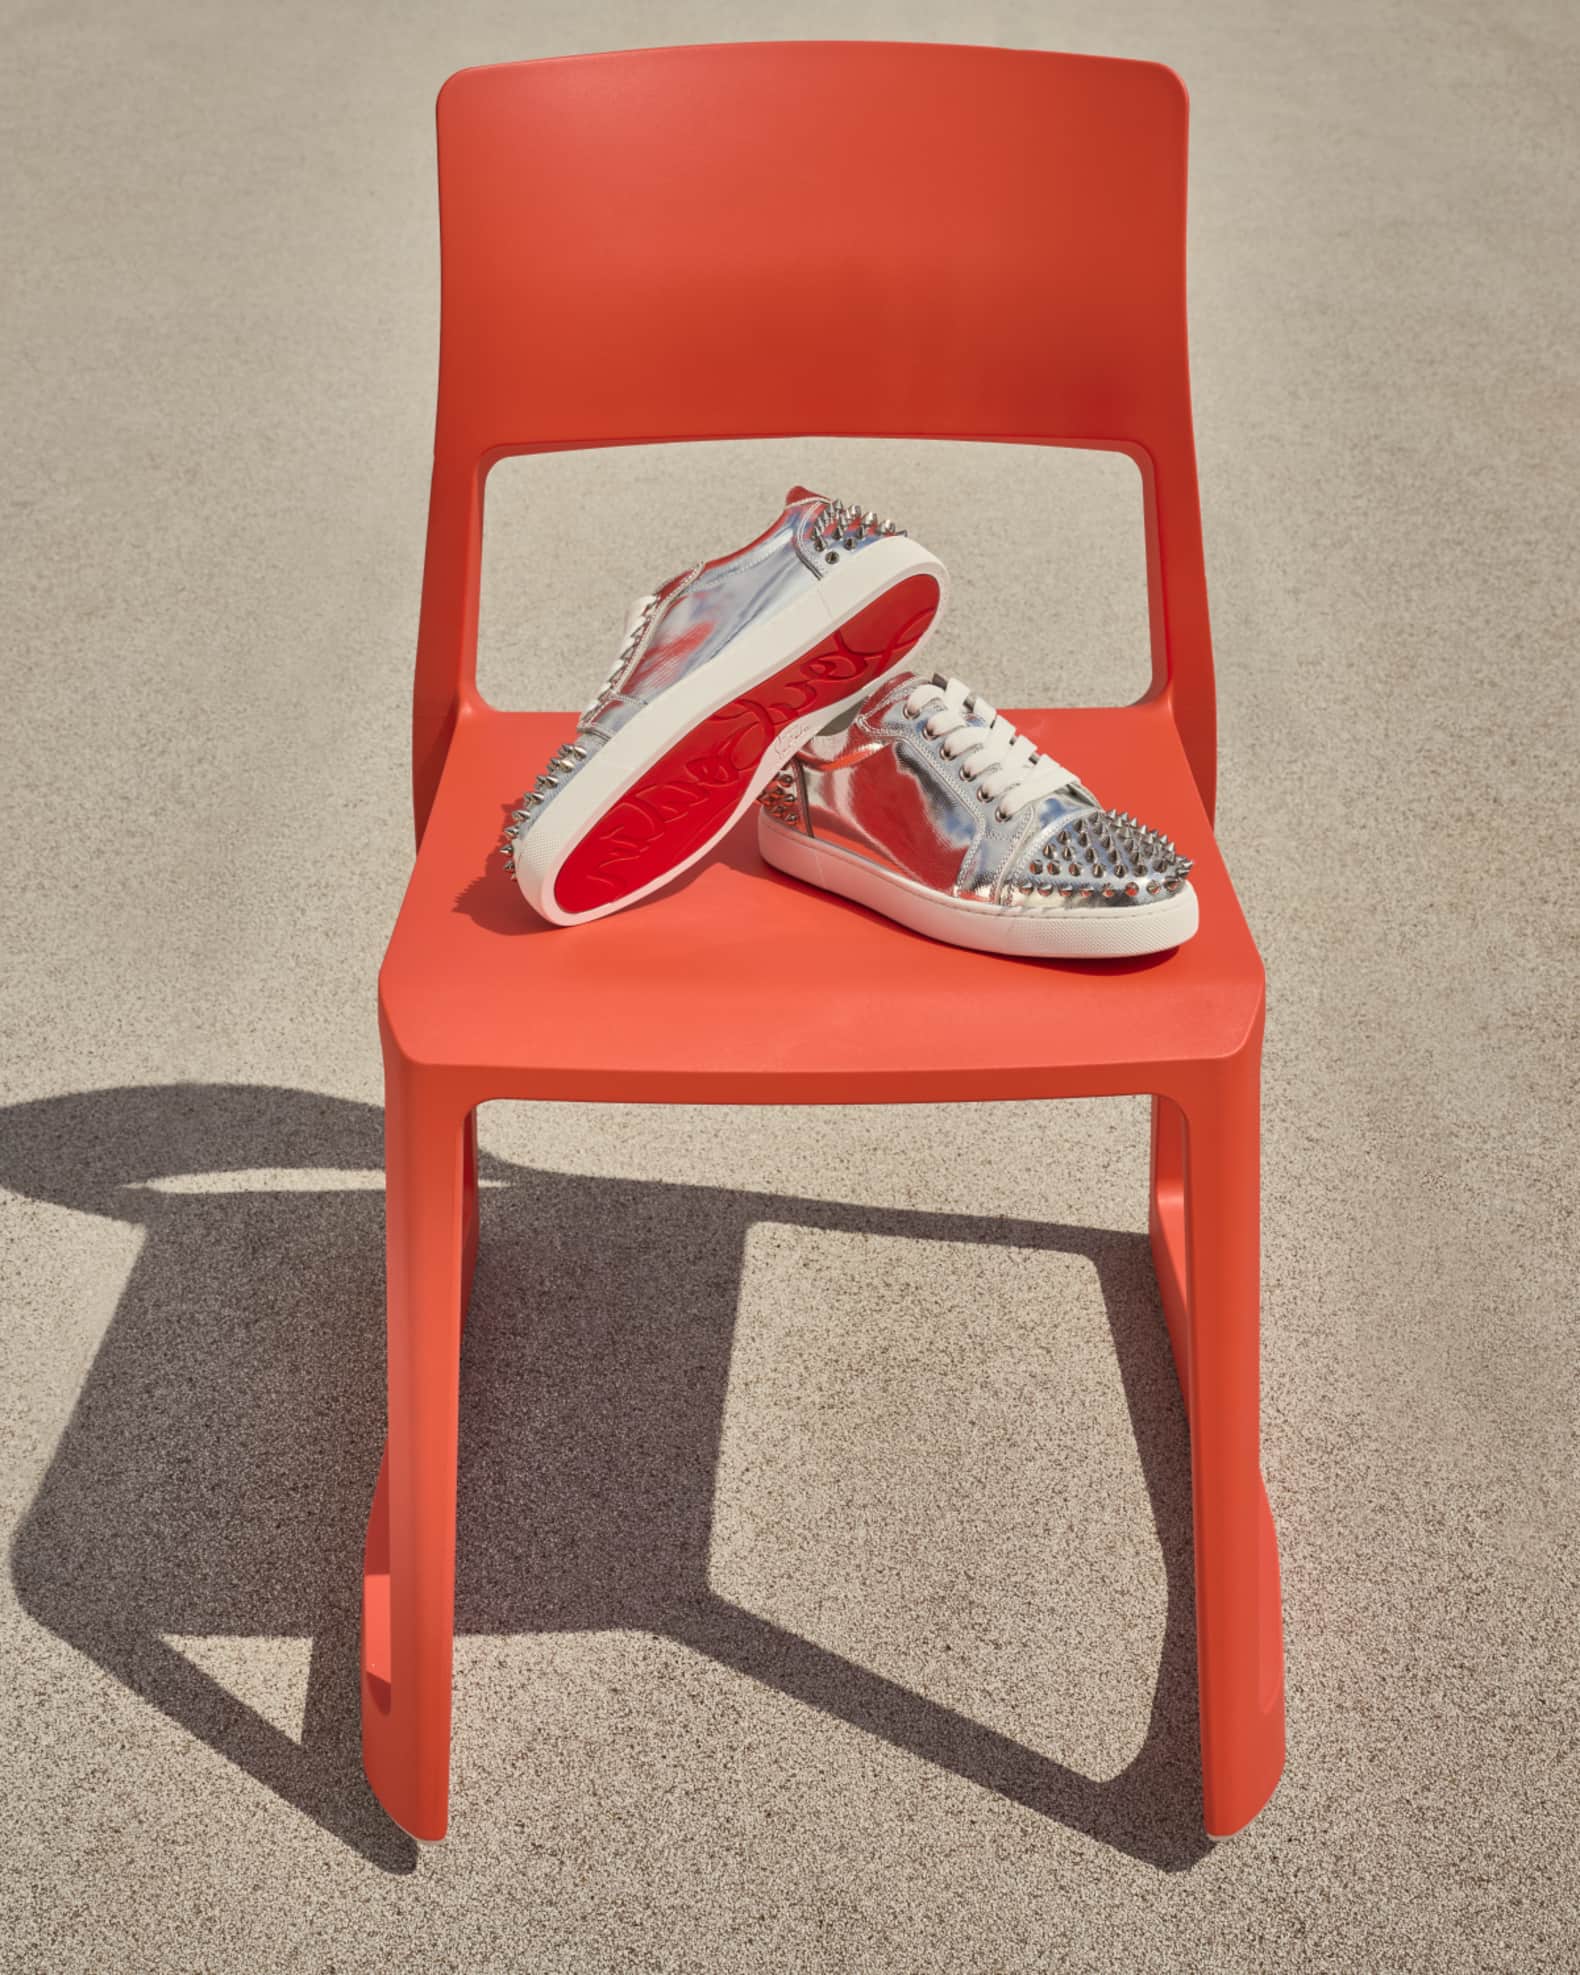 Vieira 2 - Low-top sneakers - Glittered calf leather and spikes - Silver -  Christian Louboutin